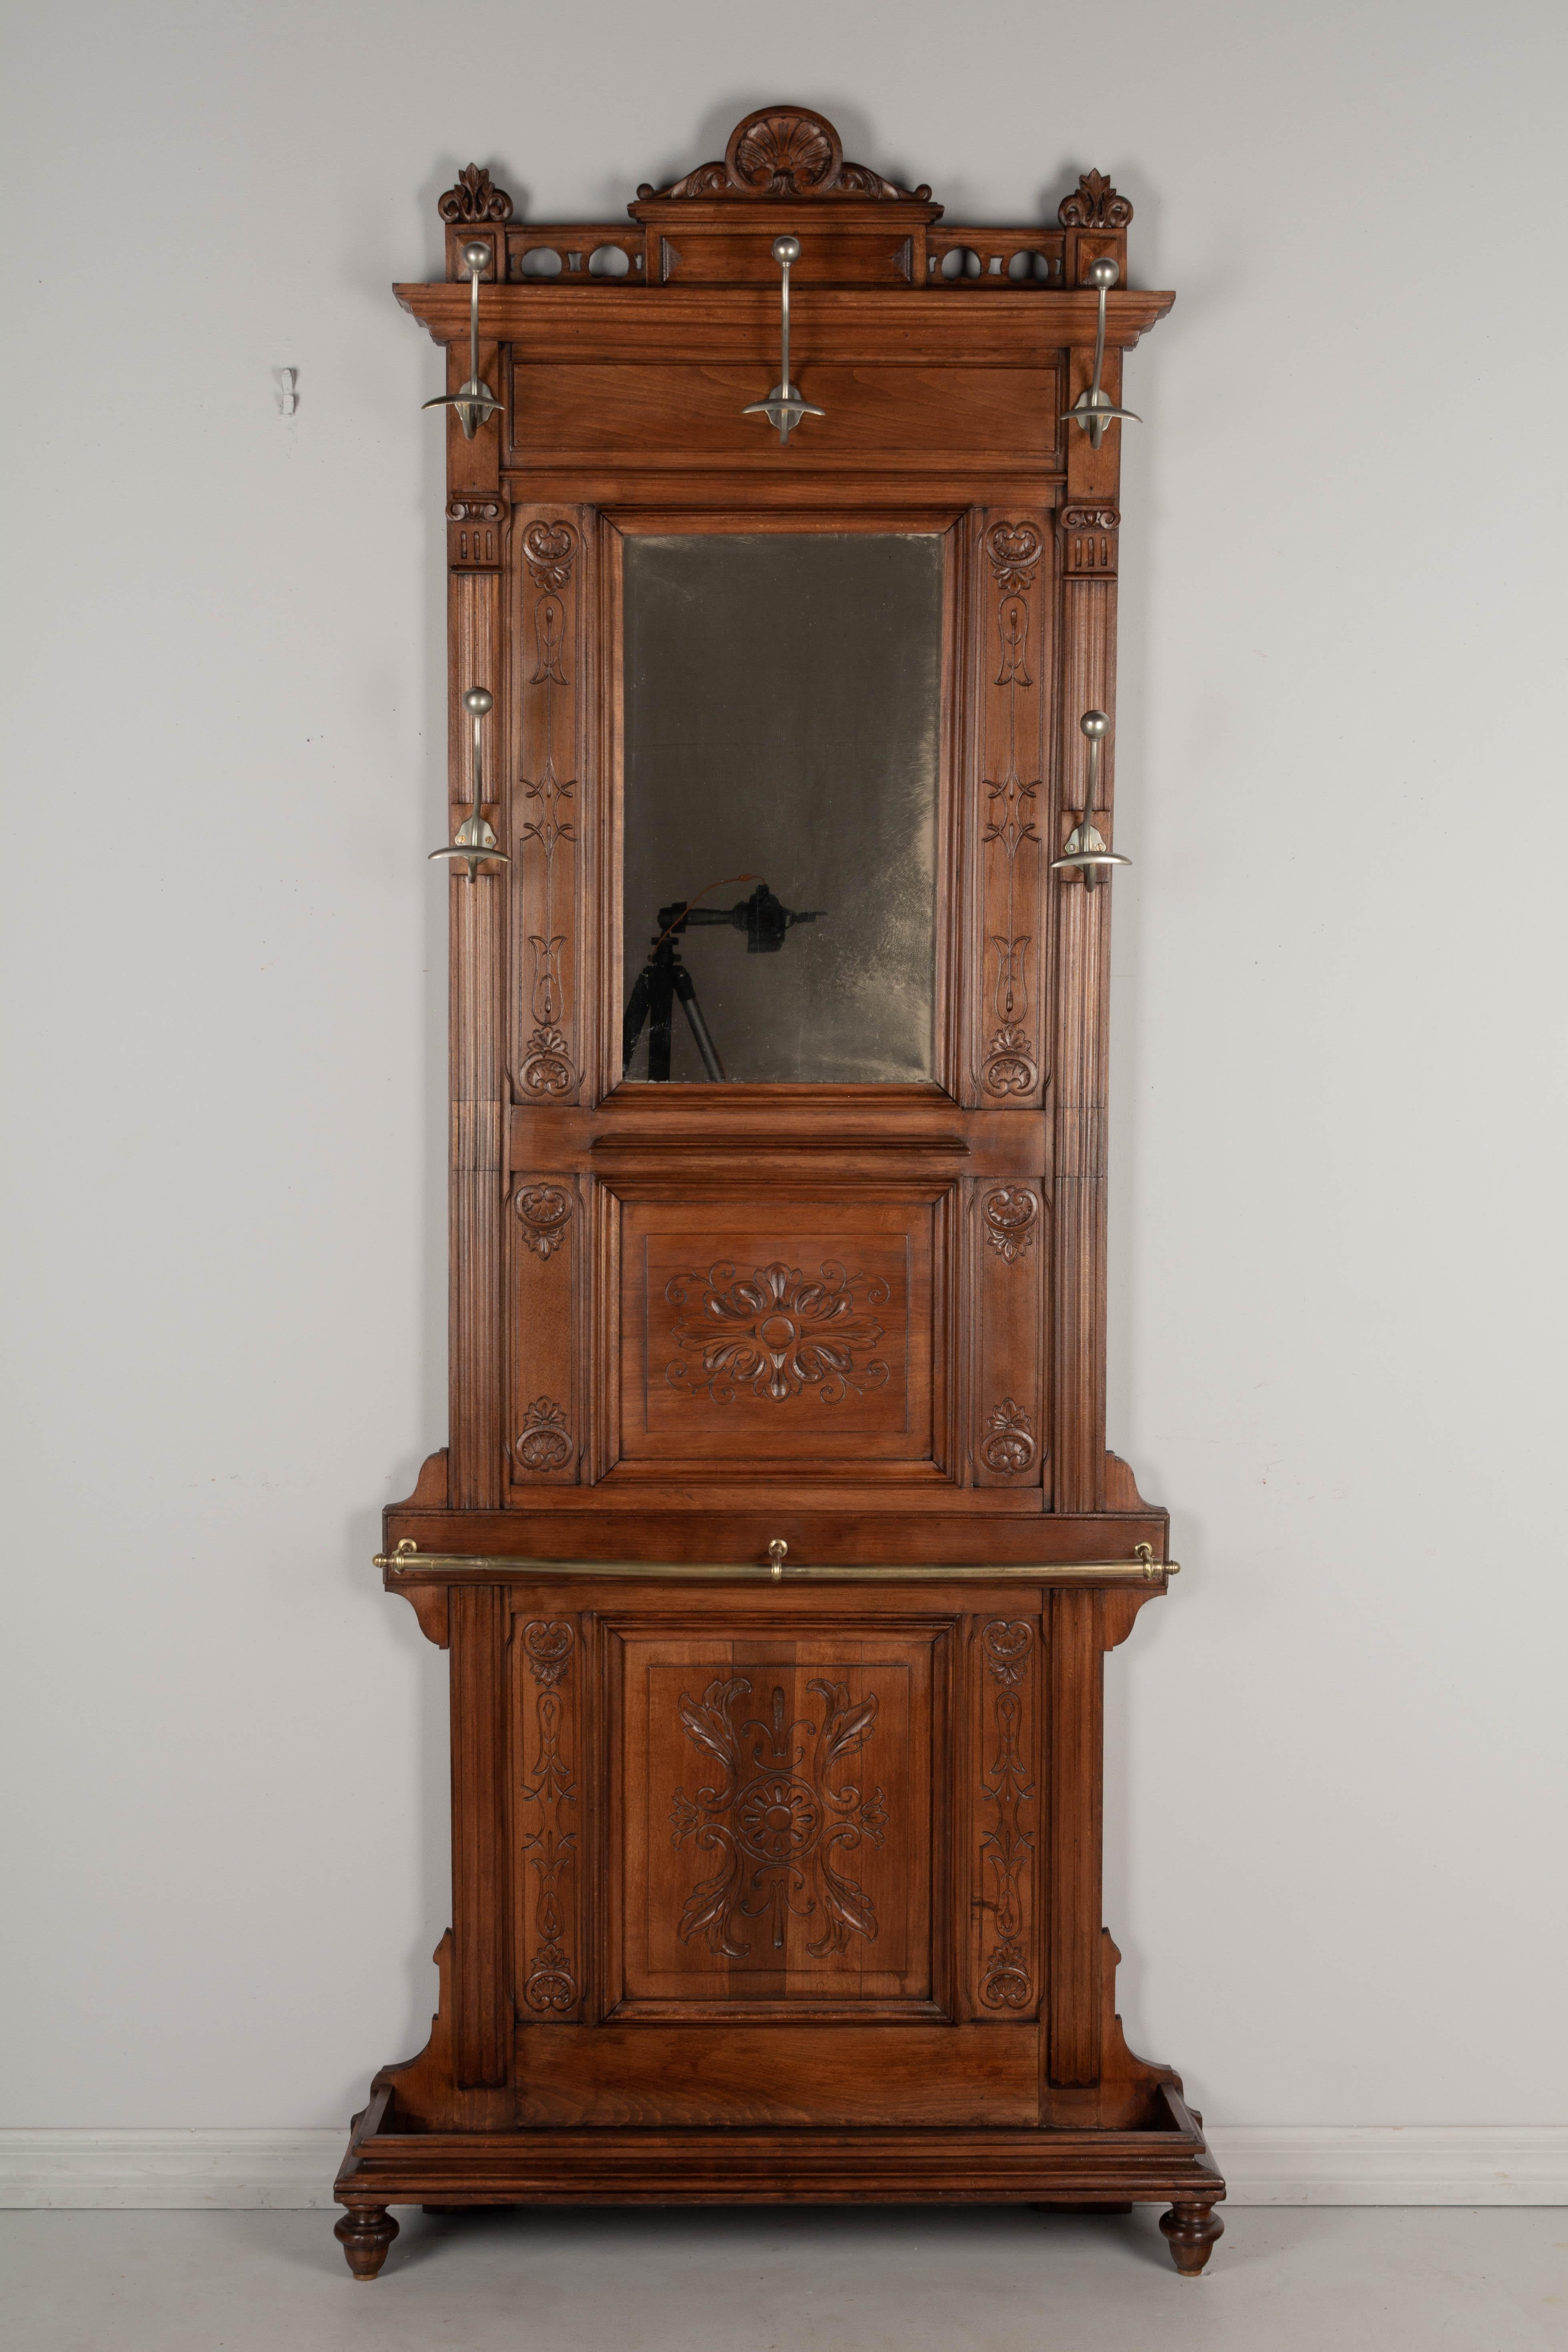 A Louis XVI style French entryway hall tree, or coat rack, with mirror. Made of solid beech wood with hand carved decoration and five coat hooks. Small shelf in the center beneath the mirror. Umbrellas or walking canes are held by a brass bar across